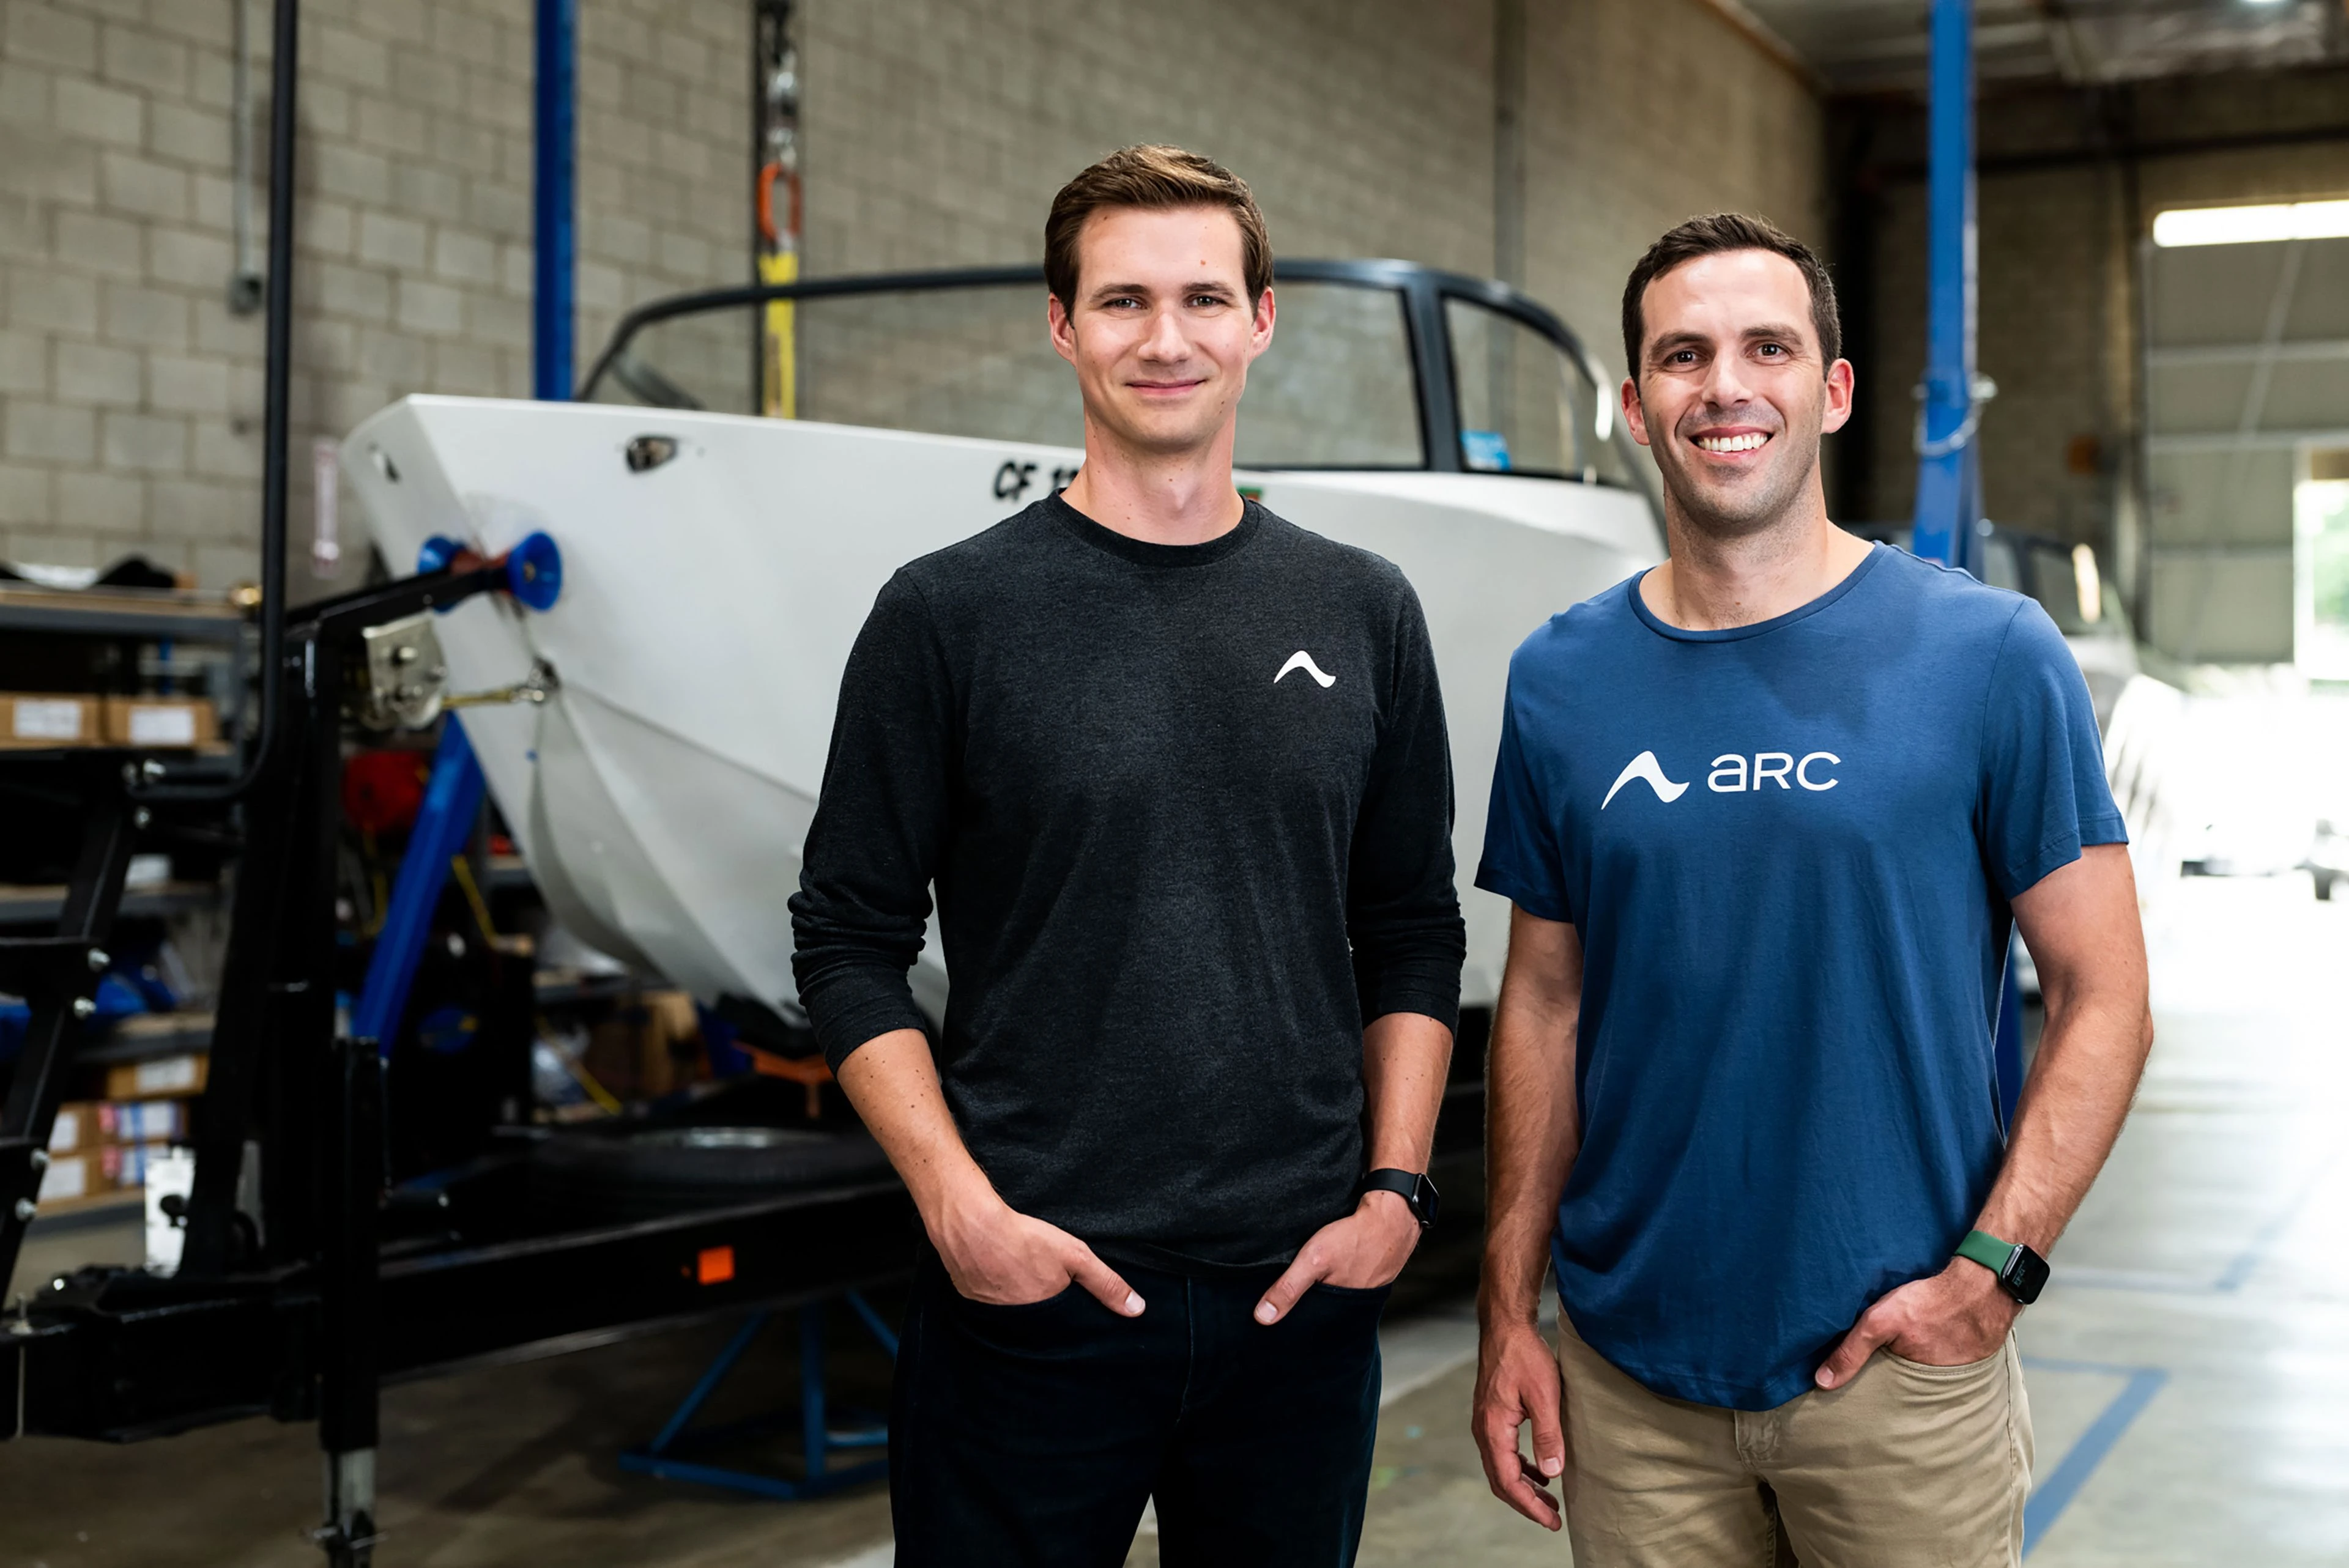 Ryan Cook and Mitch Lee, Arc's co-founders, standing in front of a boat